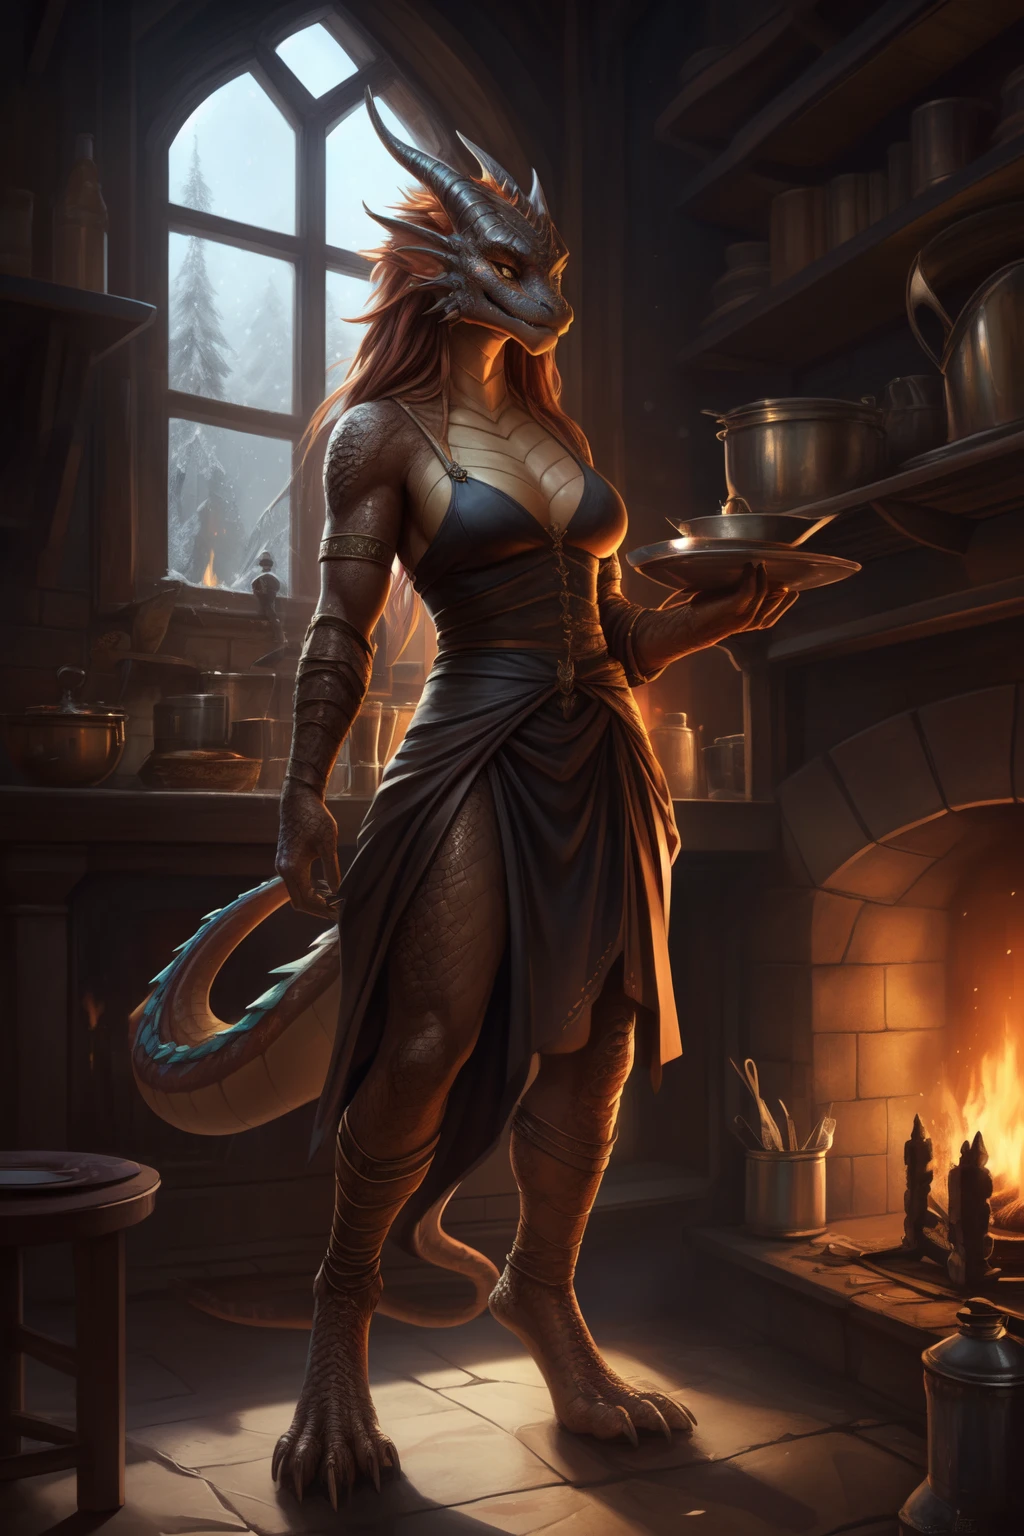 uploaded on e621, by Pixelsketcher, by Bayard Wu, by Thomas Benjamin Kennington , by Einshelm, solo anthro, ((full length, General plan)), BREAK, ((concentration)), (detailed Bonifasko lighting), (Detailed scales), (detailed skin), (Colorful Dragon, Colorful Dragon, Colorful Dragon), BREAK, ((Dragon's feeling)), ((NSFW)), ((Long, Graceful multi-colored tail)), (flowing ginger hair)), ((Detailed background)), ((in full height)), (((Type of faces))), (half body shadow), [Backlighting], [twilight ray], [Detailed ambient light], [gray natural lighting], [Ambient light], (A higher level of detail in the kitchen of a medieval tavern), [explict content], [sharp-focus], (Questionable content), (shaded), ((Masterpiece), feeling, With their own hands;, flowing long hair, Chest of medium scales, Fluffy multi-colored dragon, Dragon Face, furry fantasy art, Furry art, commission for high res, anthro art, Art,Sakimichan is beautiful, Masterpiece, Best Quality, Detailed image, Bright colors, Detailed Face, perfect  lighting, Perfect shadows, Perfect eyes, focus on girl, dragon eyes, flawless face, (( Graceful multi-colored tail)) dragon, light skin, Dragon Girl, Scalie, Scaly Women, Dragon's nose, Large long muzzle, Multi-colored scales, gaze at the viewer, half closed eyes, solo, (Masterpiece), (Best Quality), (illustartion), Long hair, Detailed scales, Balanced coloring, Global Illumination, Ray Tracing, good lighting, scales, anthro, Showing breasts, cleavage, looking a viewer, seductive gaze, NSFW, Medieval dress, ((Medieval cuisine, Cooking, delicious food, The character is cooking)),((fire in the hearth, fireplace, Warm lighting)), ((winter in the window, Falling snow))